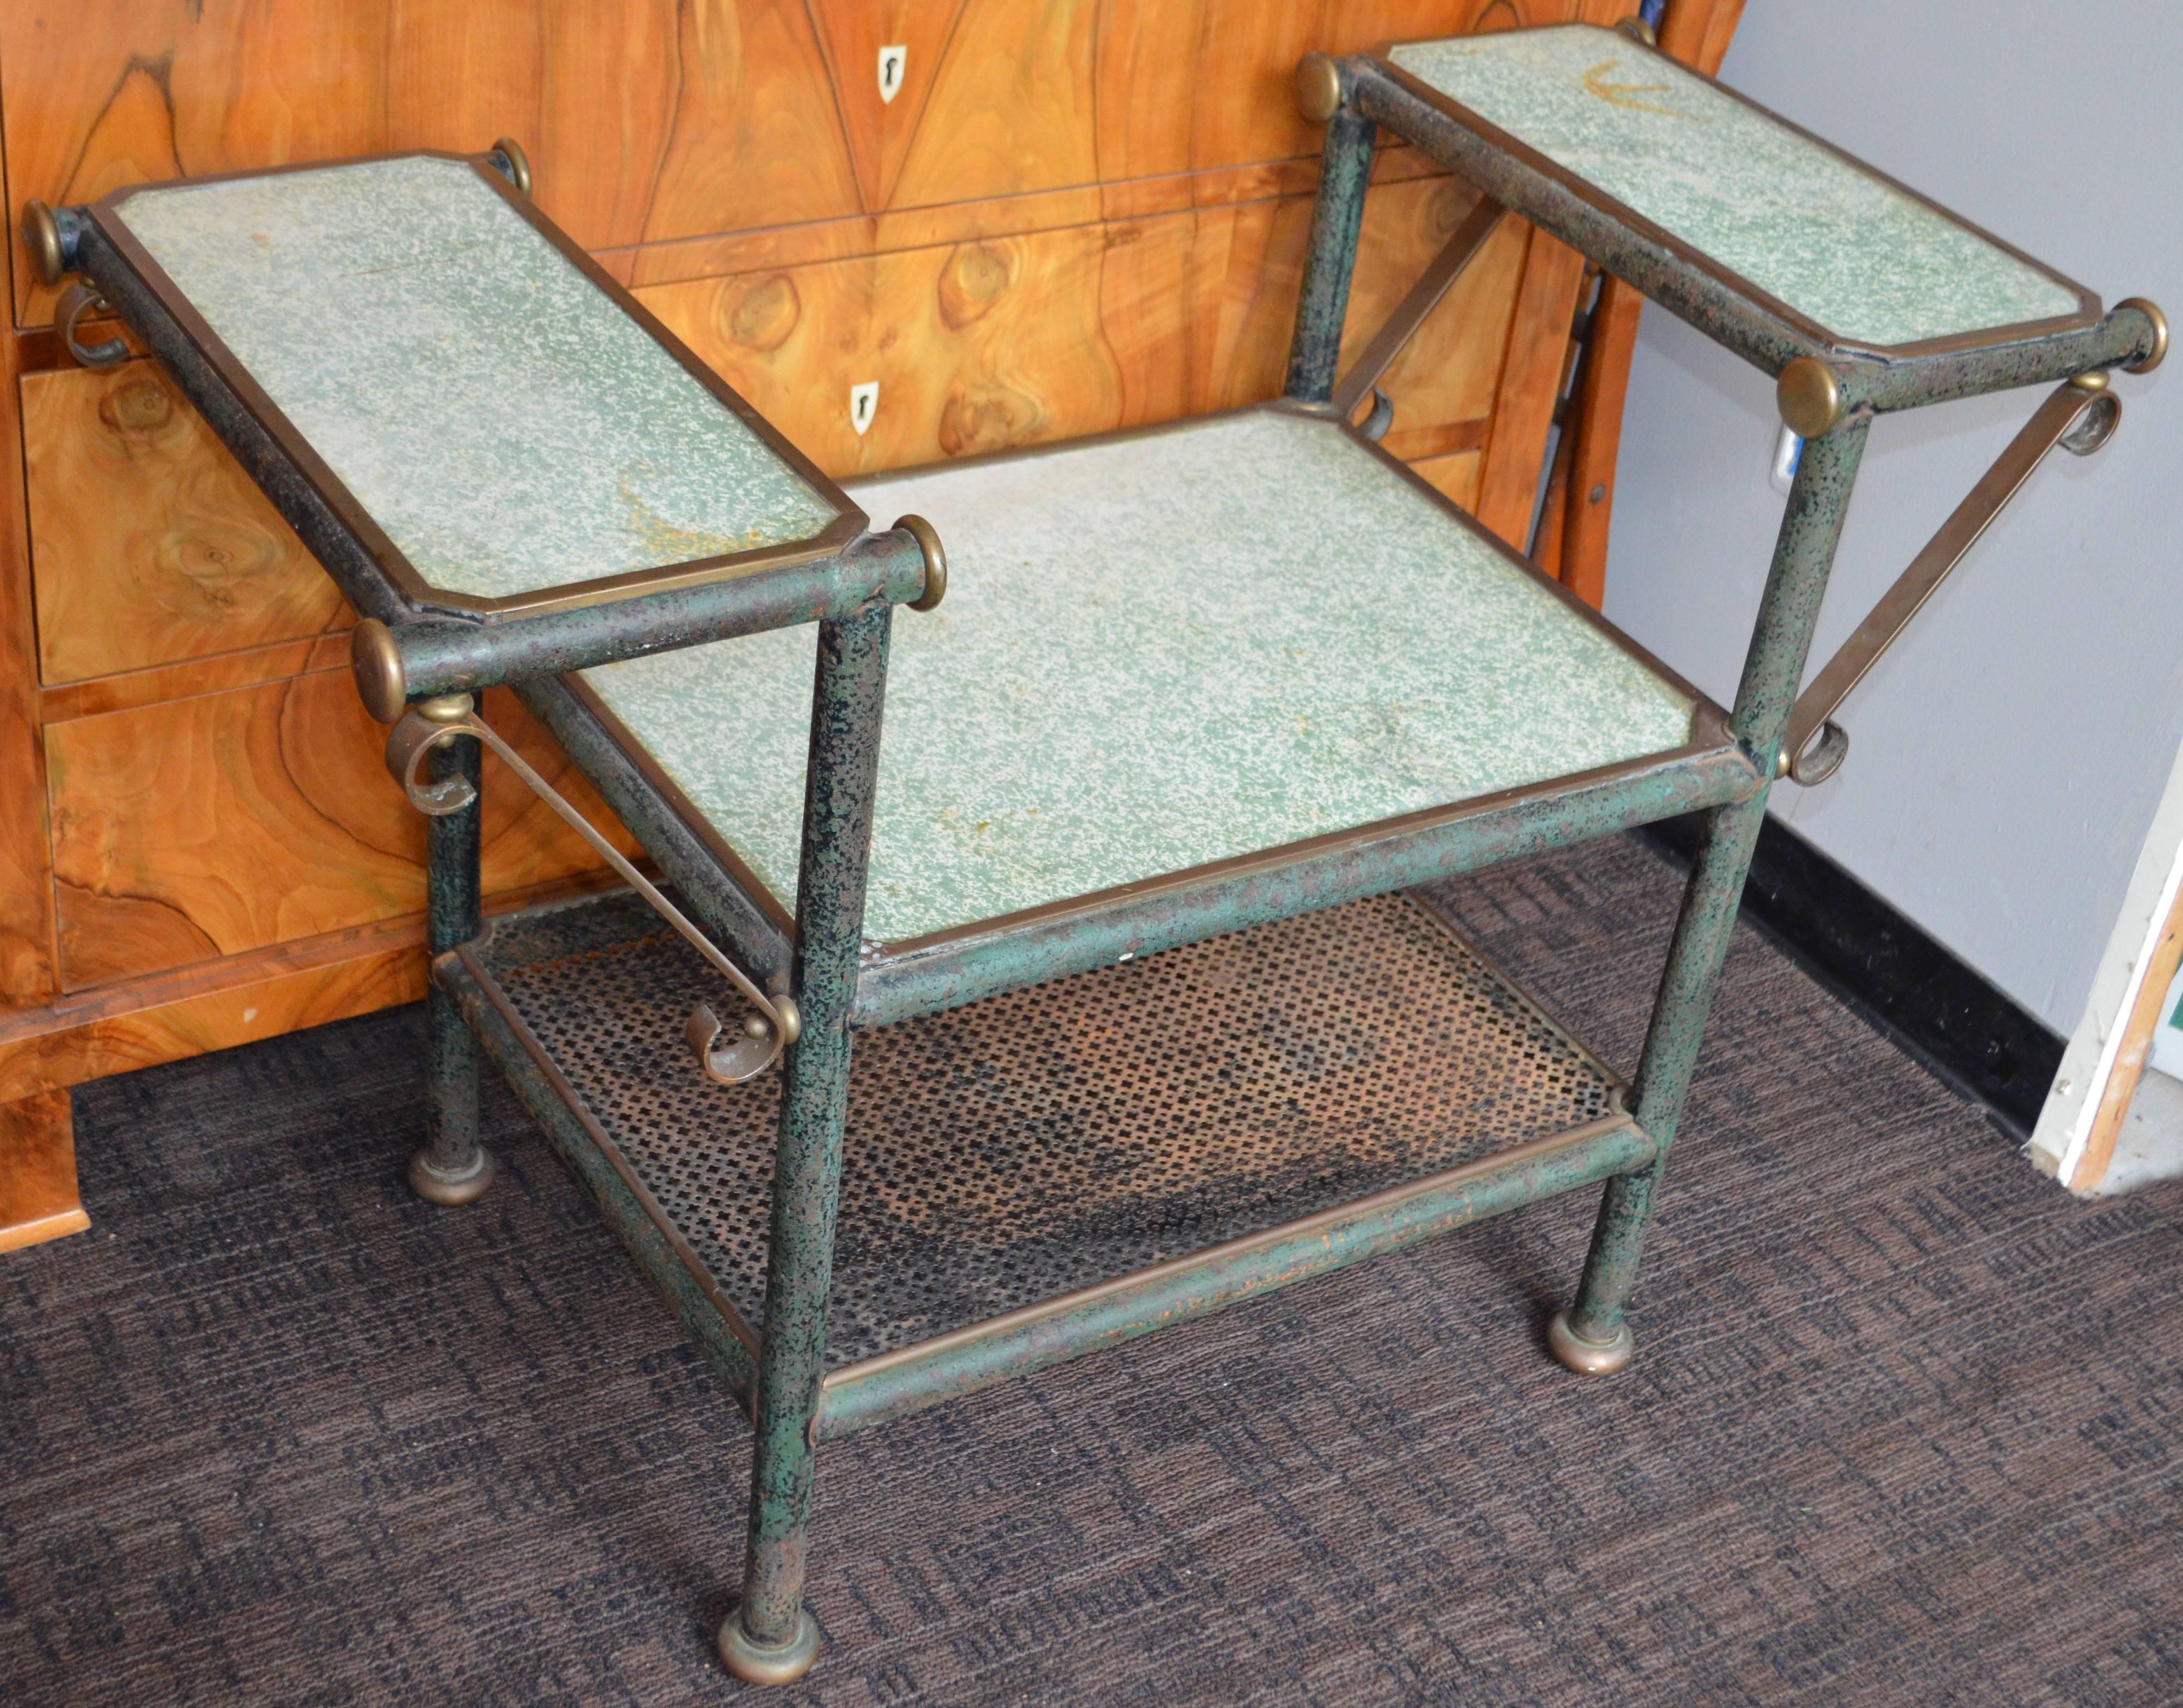 French, four-tier potting table, floral display, circa 1940. From Parisian florist shop. Heavy-duty iron frame with bronze trim and formica work counters. The iron has a subtle paint patina. Steel mesh shelf beneath is removable. Heavy duty,